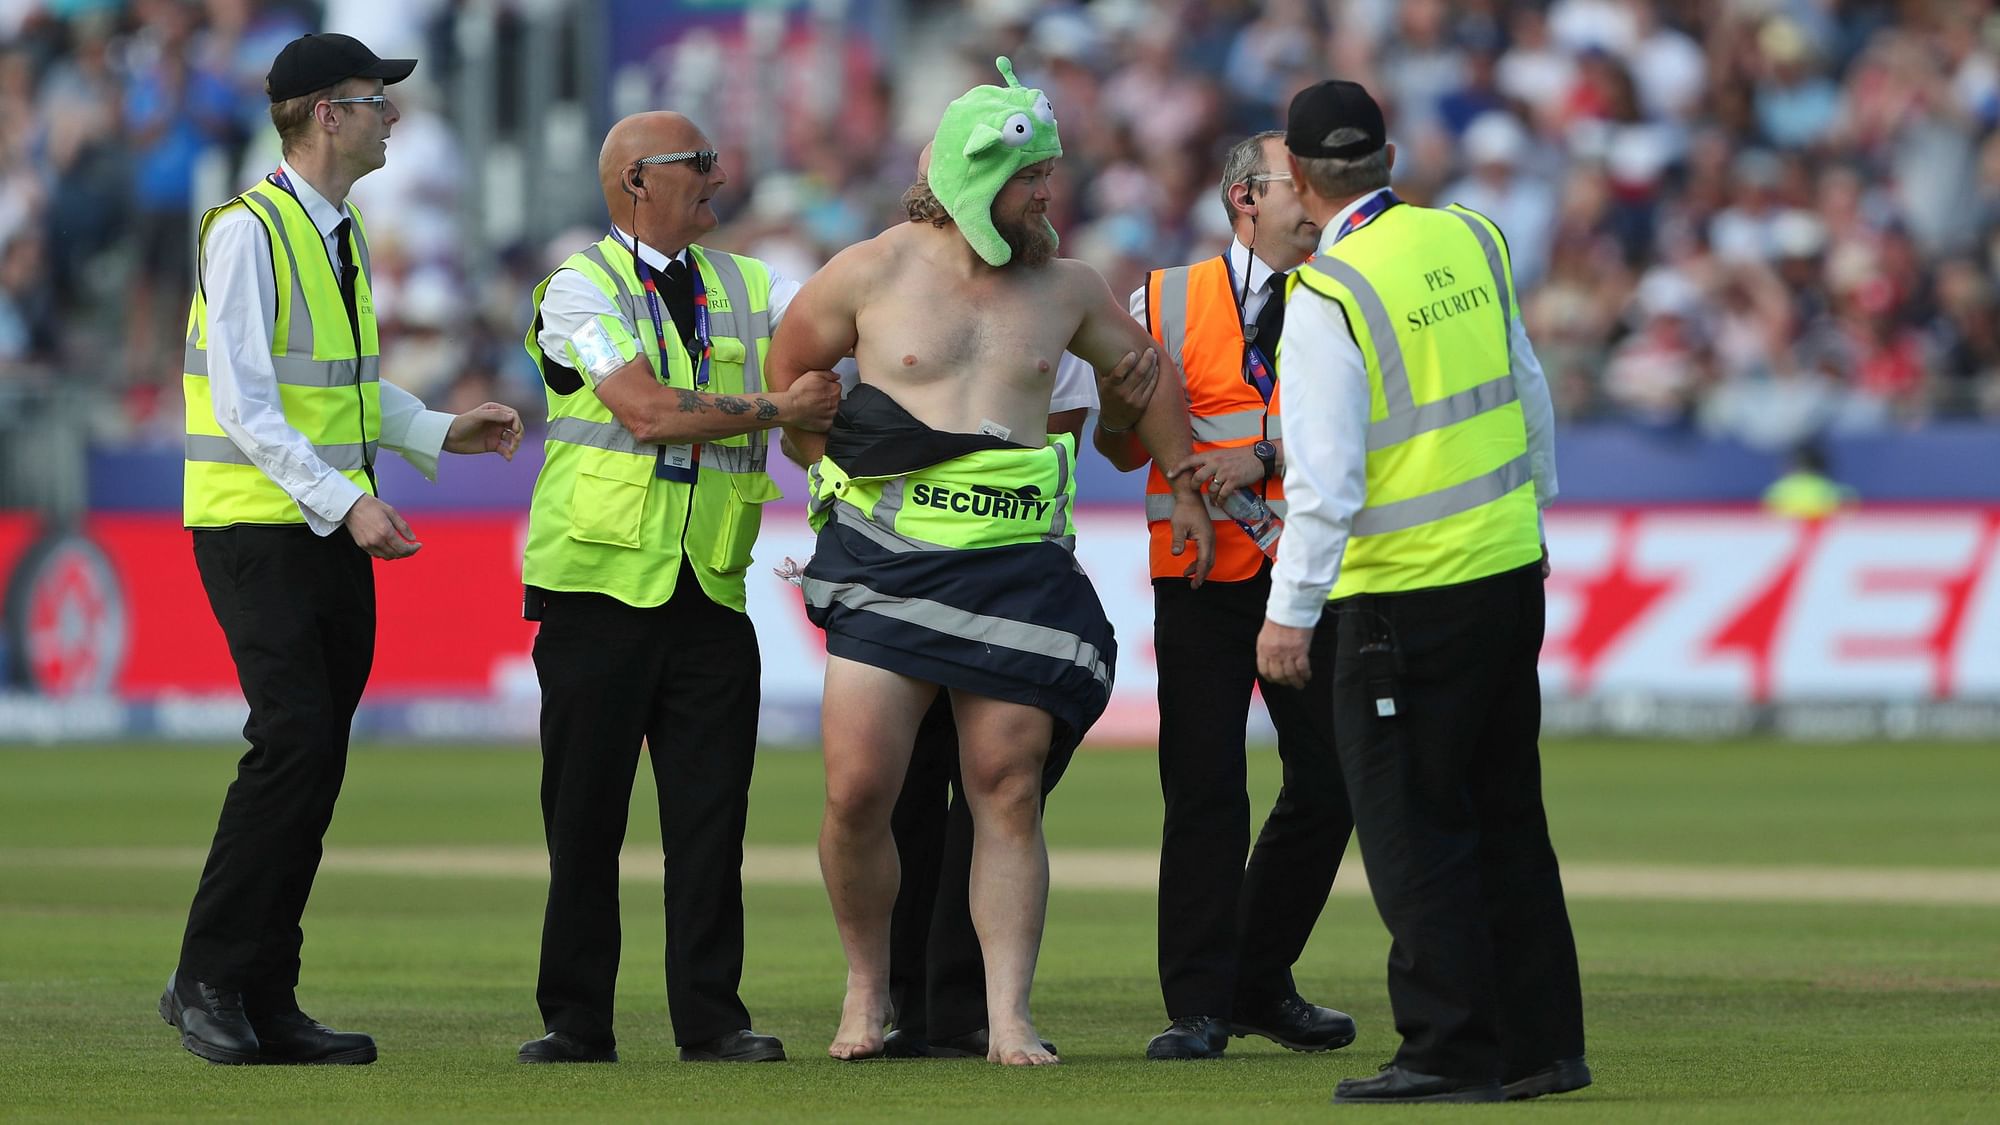 A streaker wearing nothing but a green hat ran onto the field and caused a delay in play in the Cricket World Cup match between England and New Zealand.